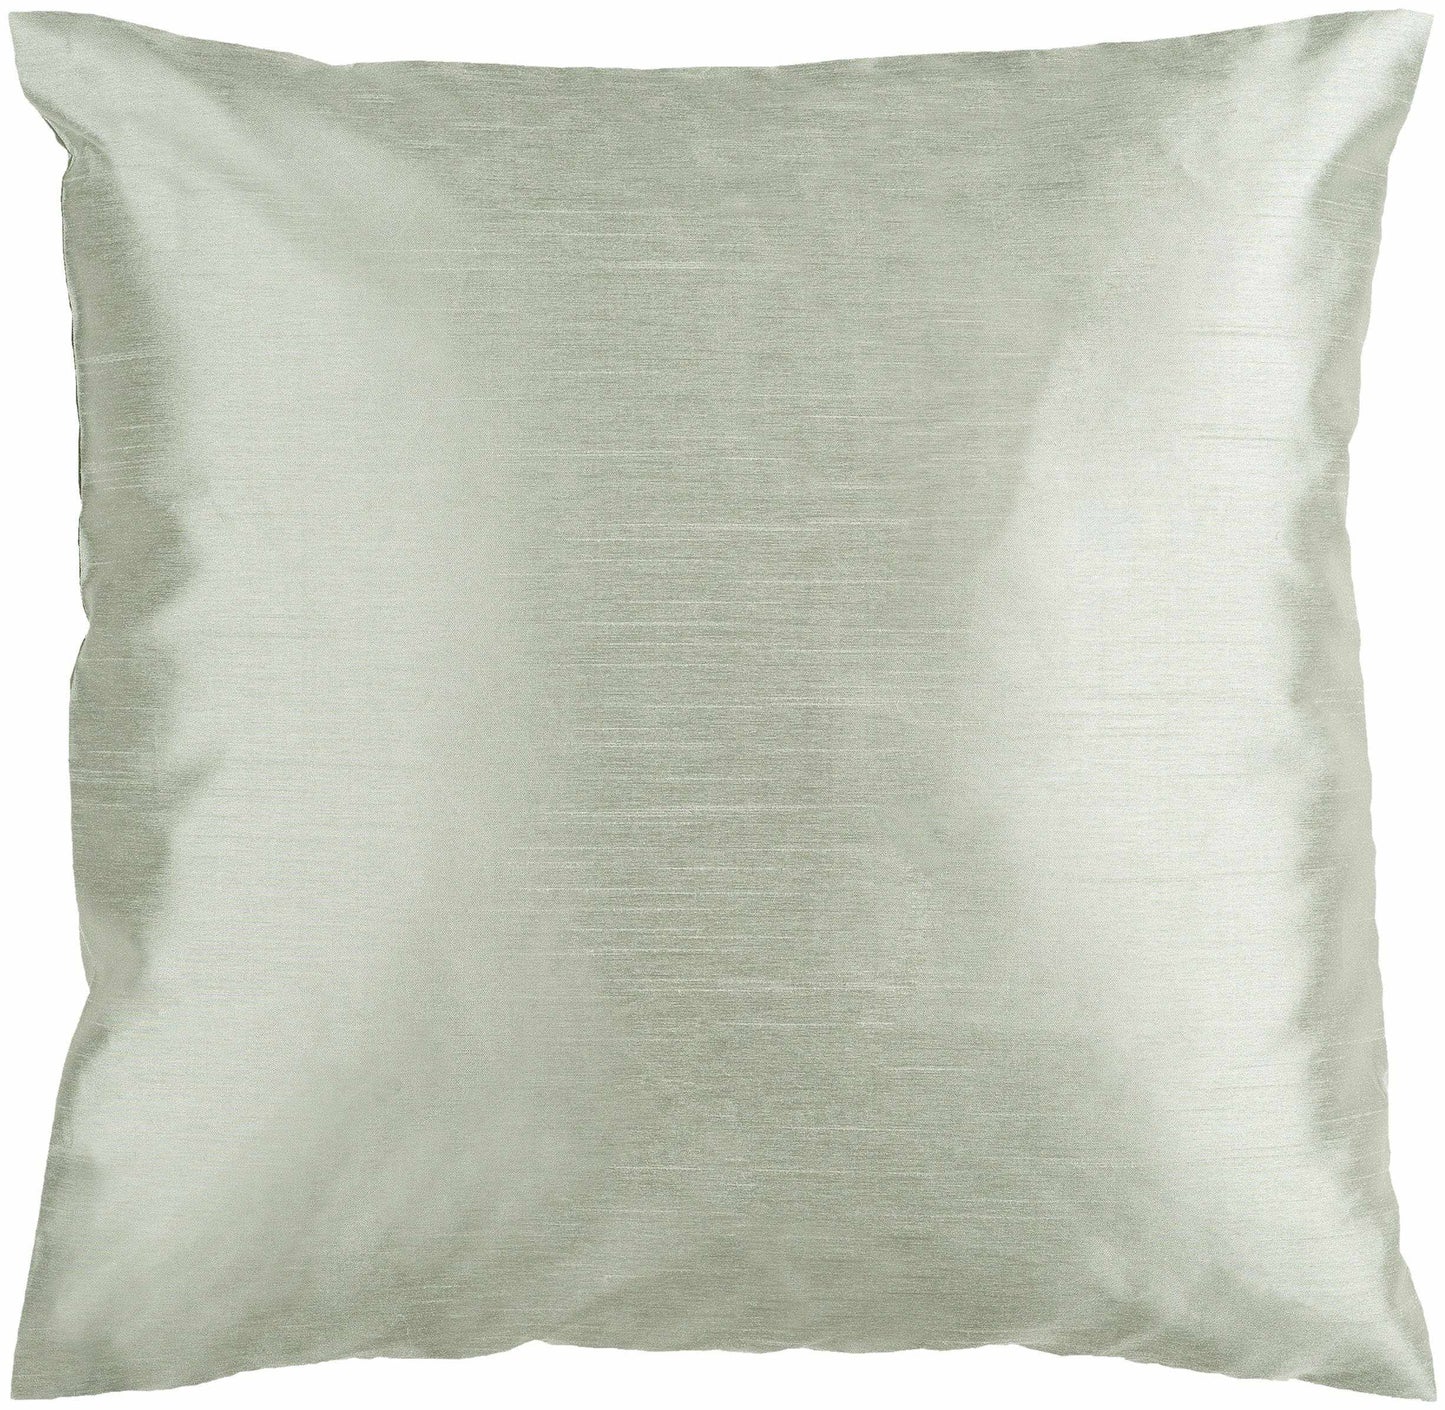 Rouvroy Sea Foam Pillow Cover